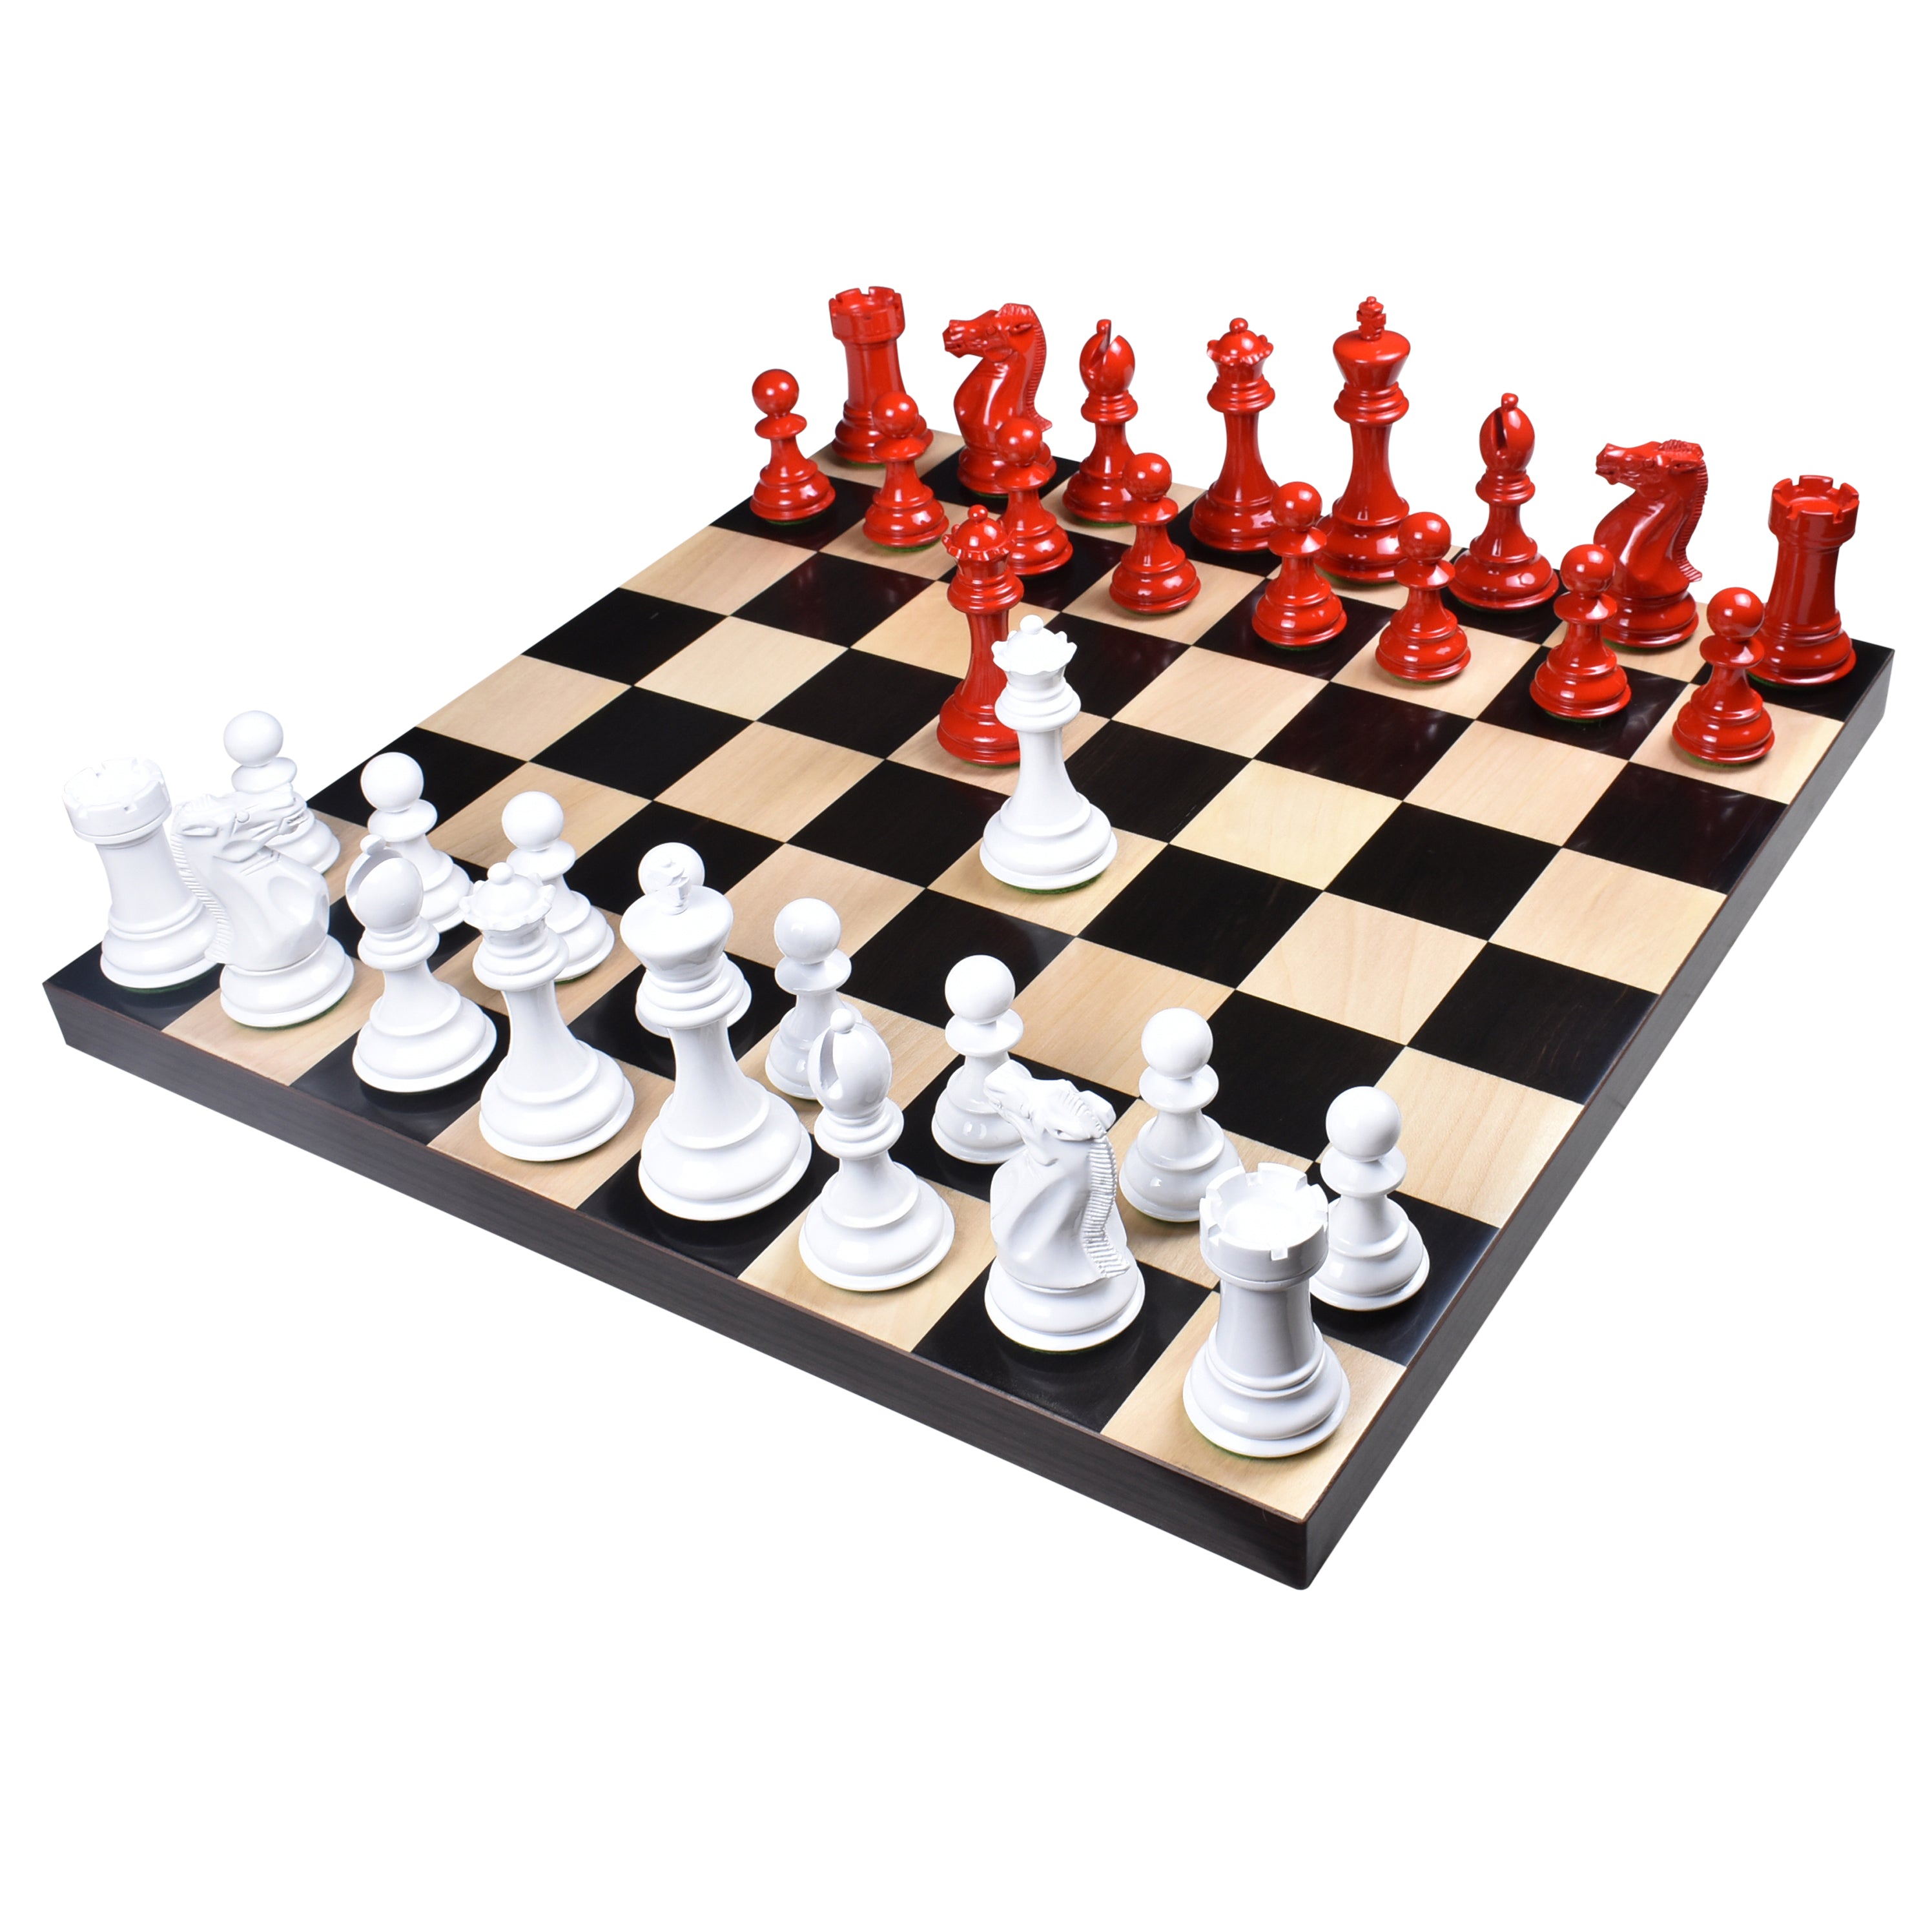 Combo of 4.1" Pro Staunton Chess Set - Pieces in Red and White Painted Boxwood with Board and Box